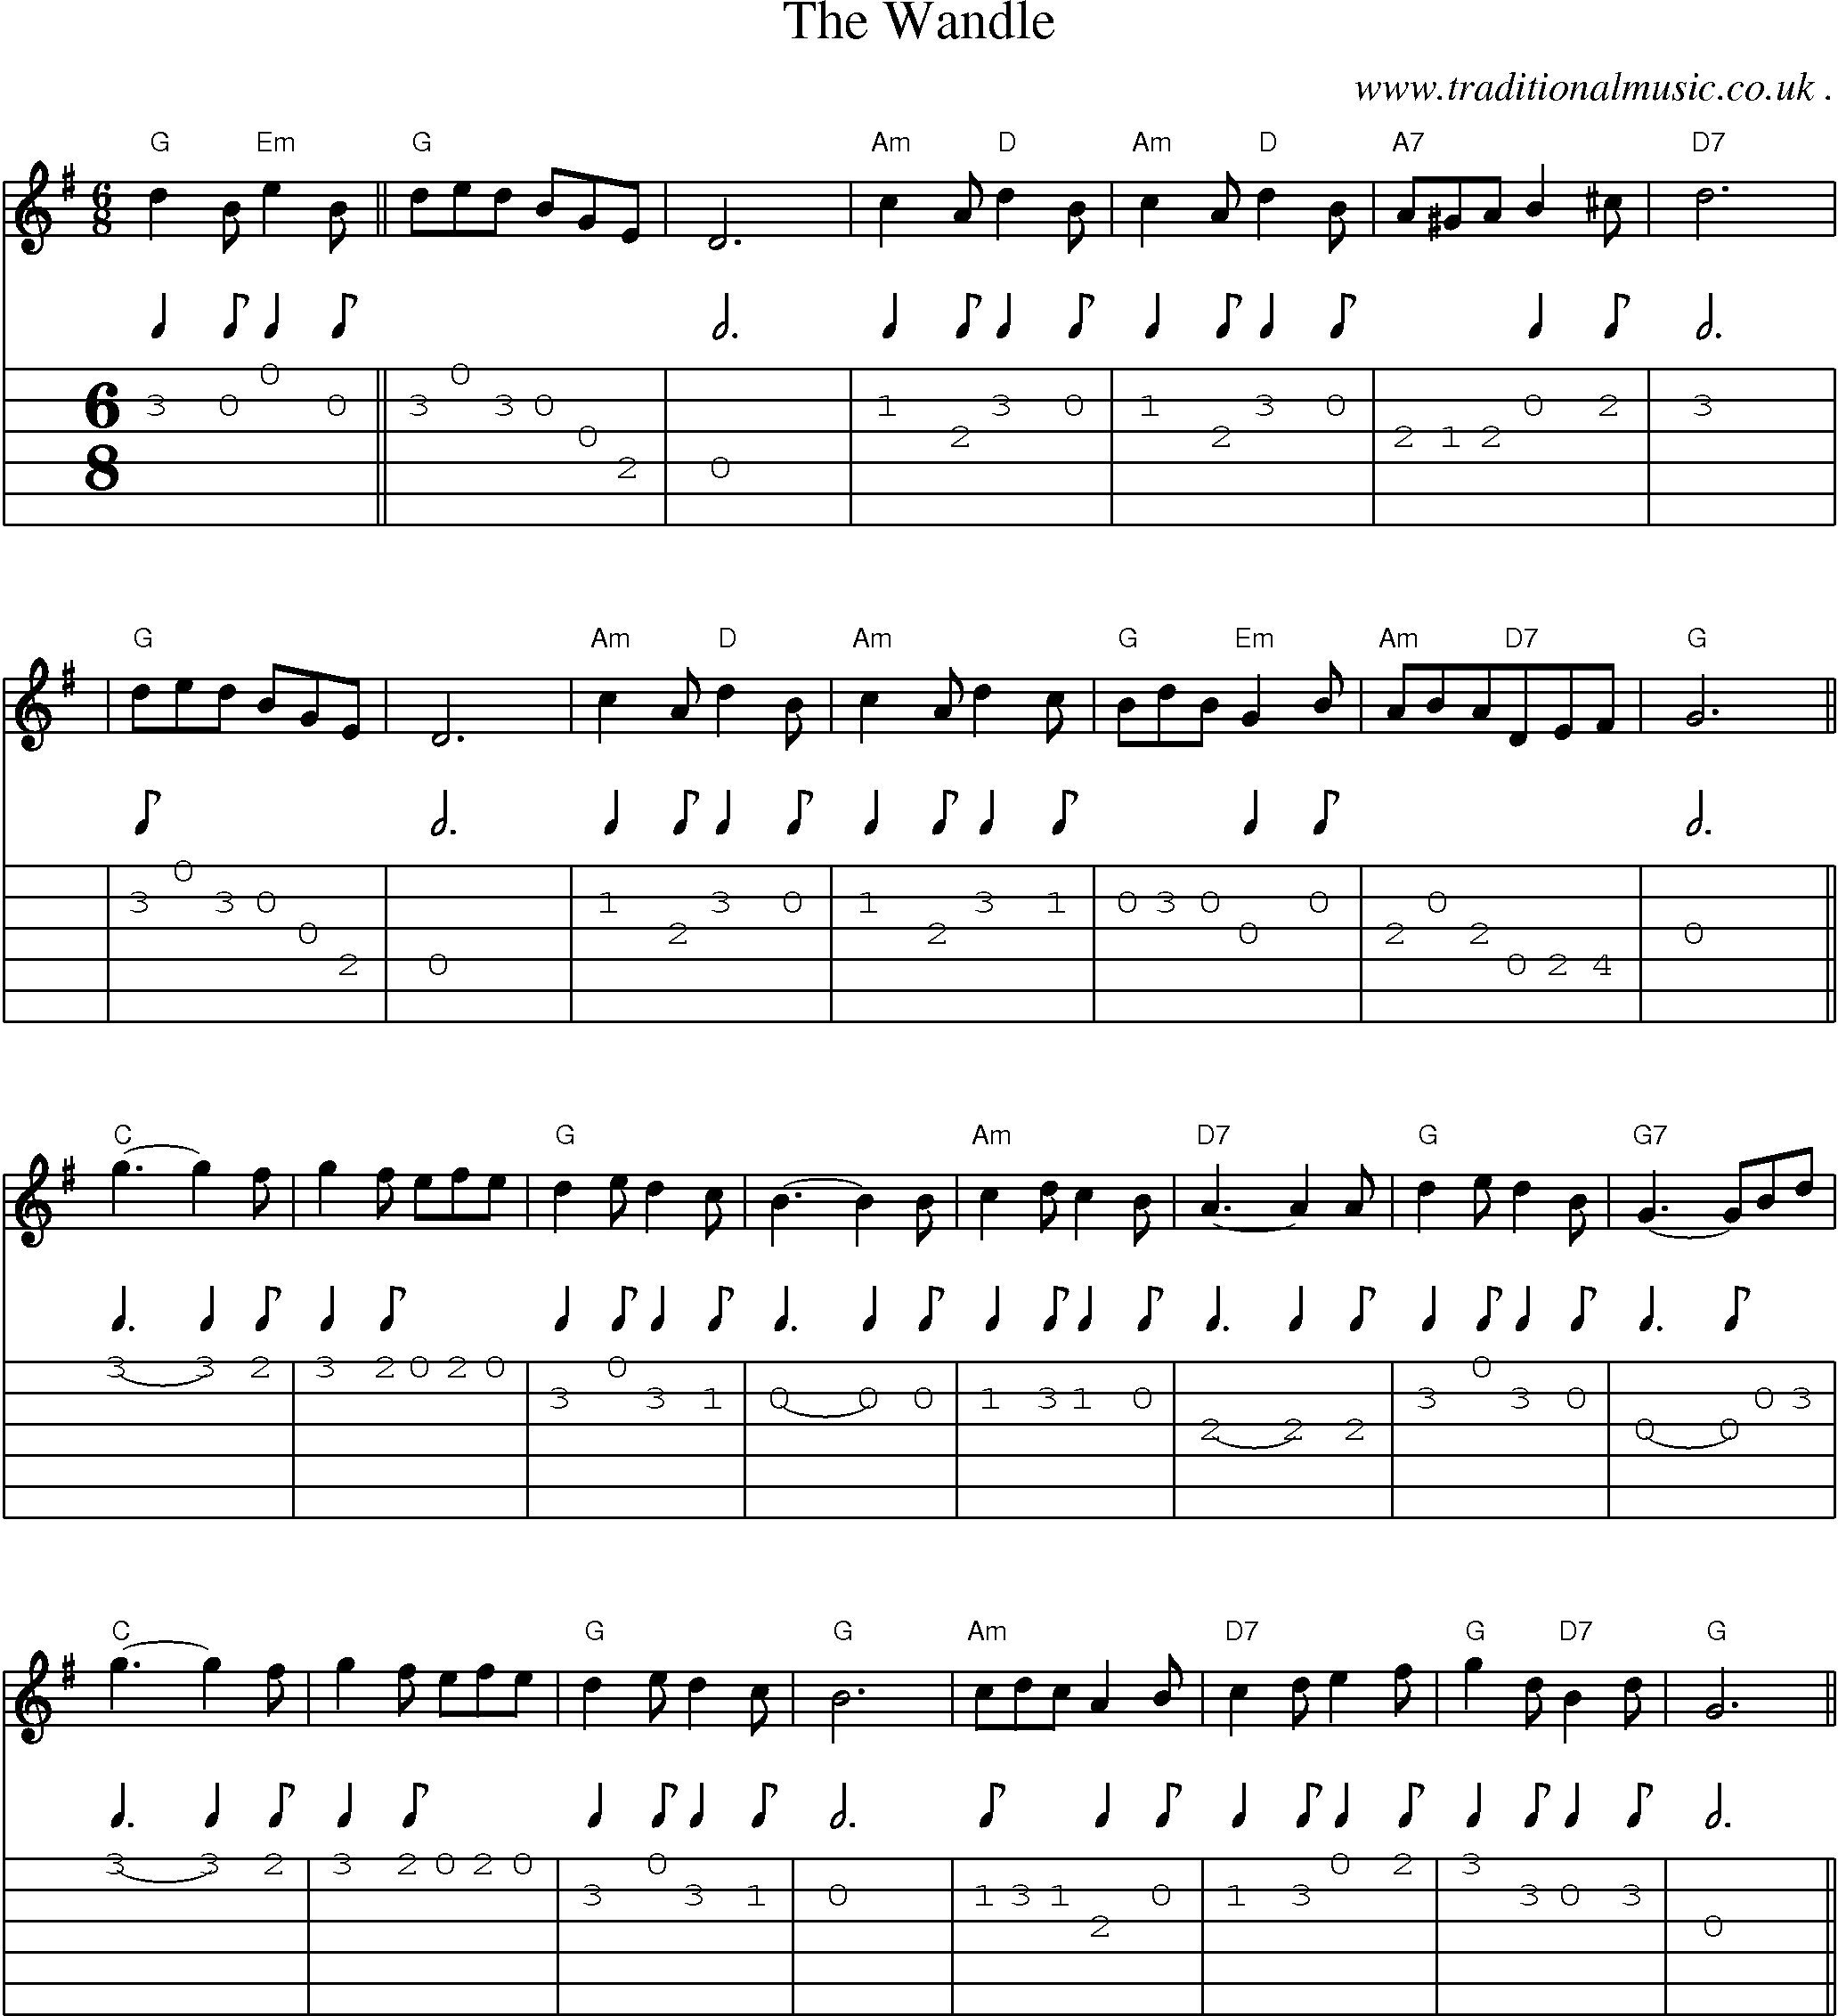 Sheet-Music and Guitar Tabs for The Wandle